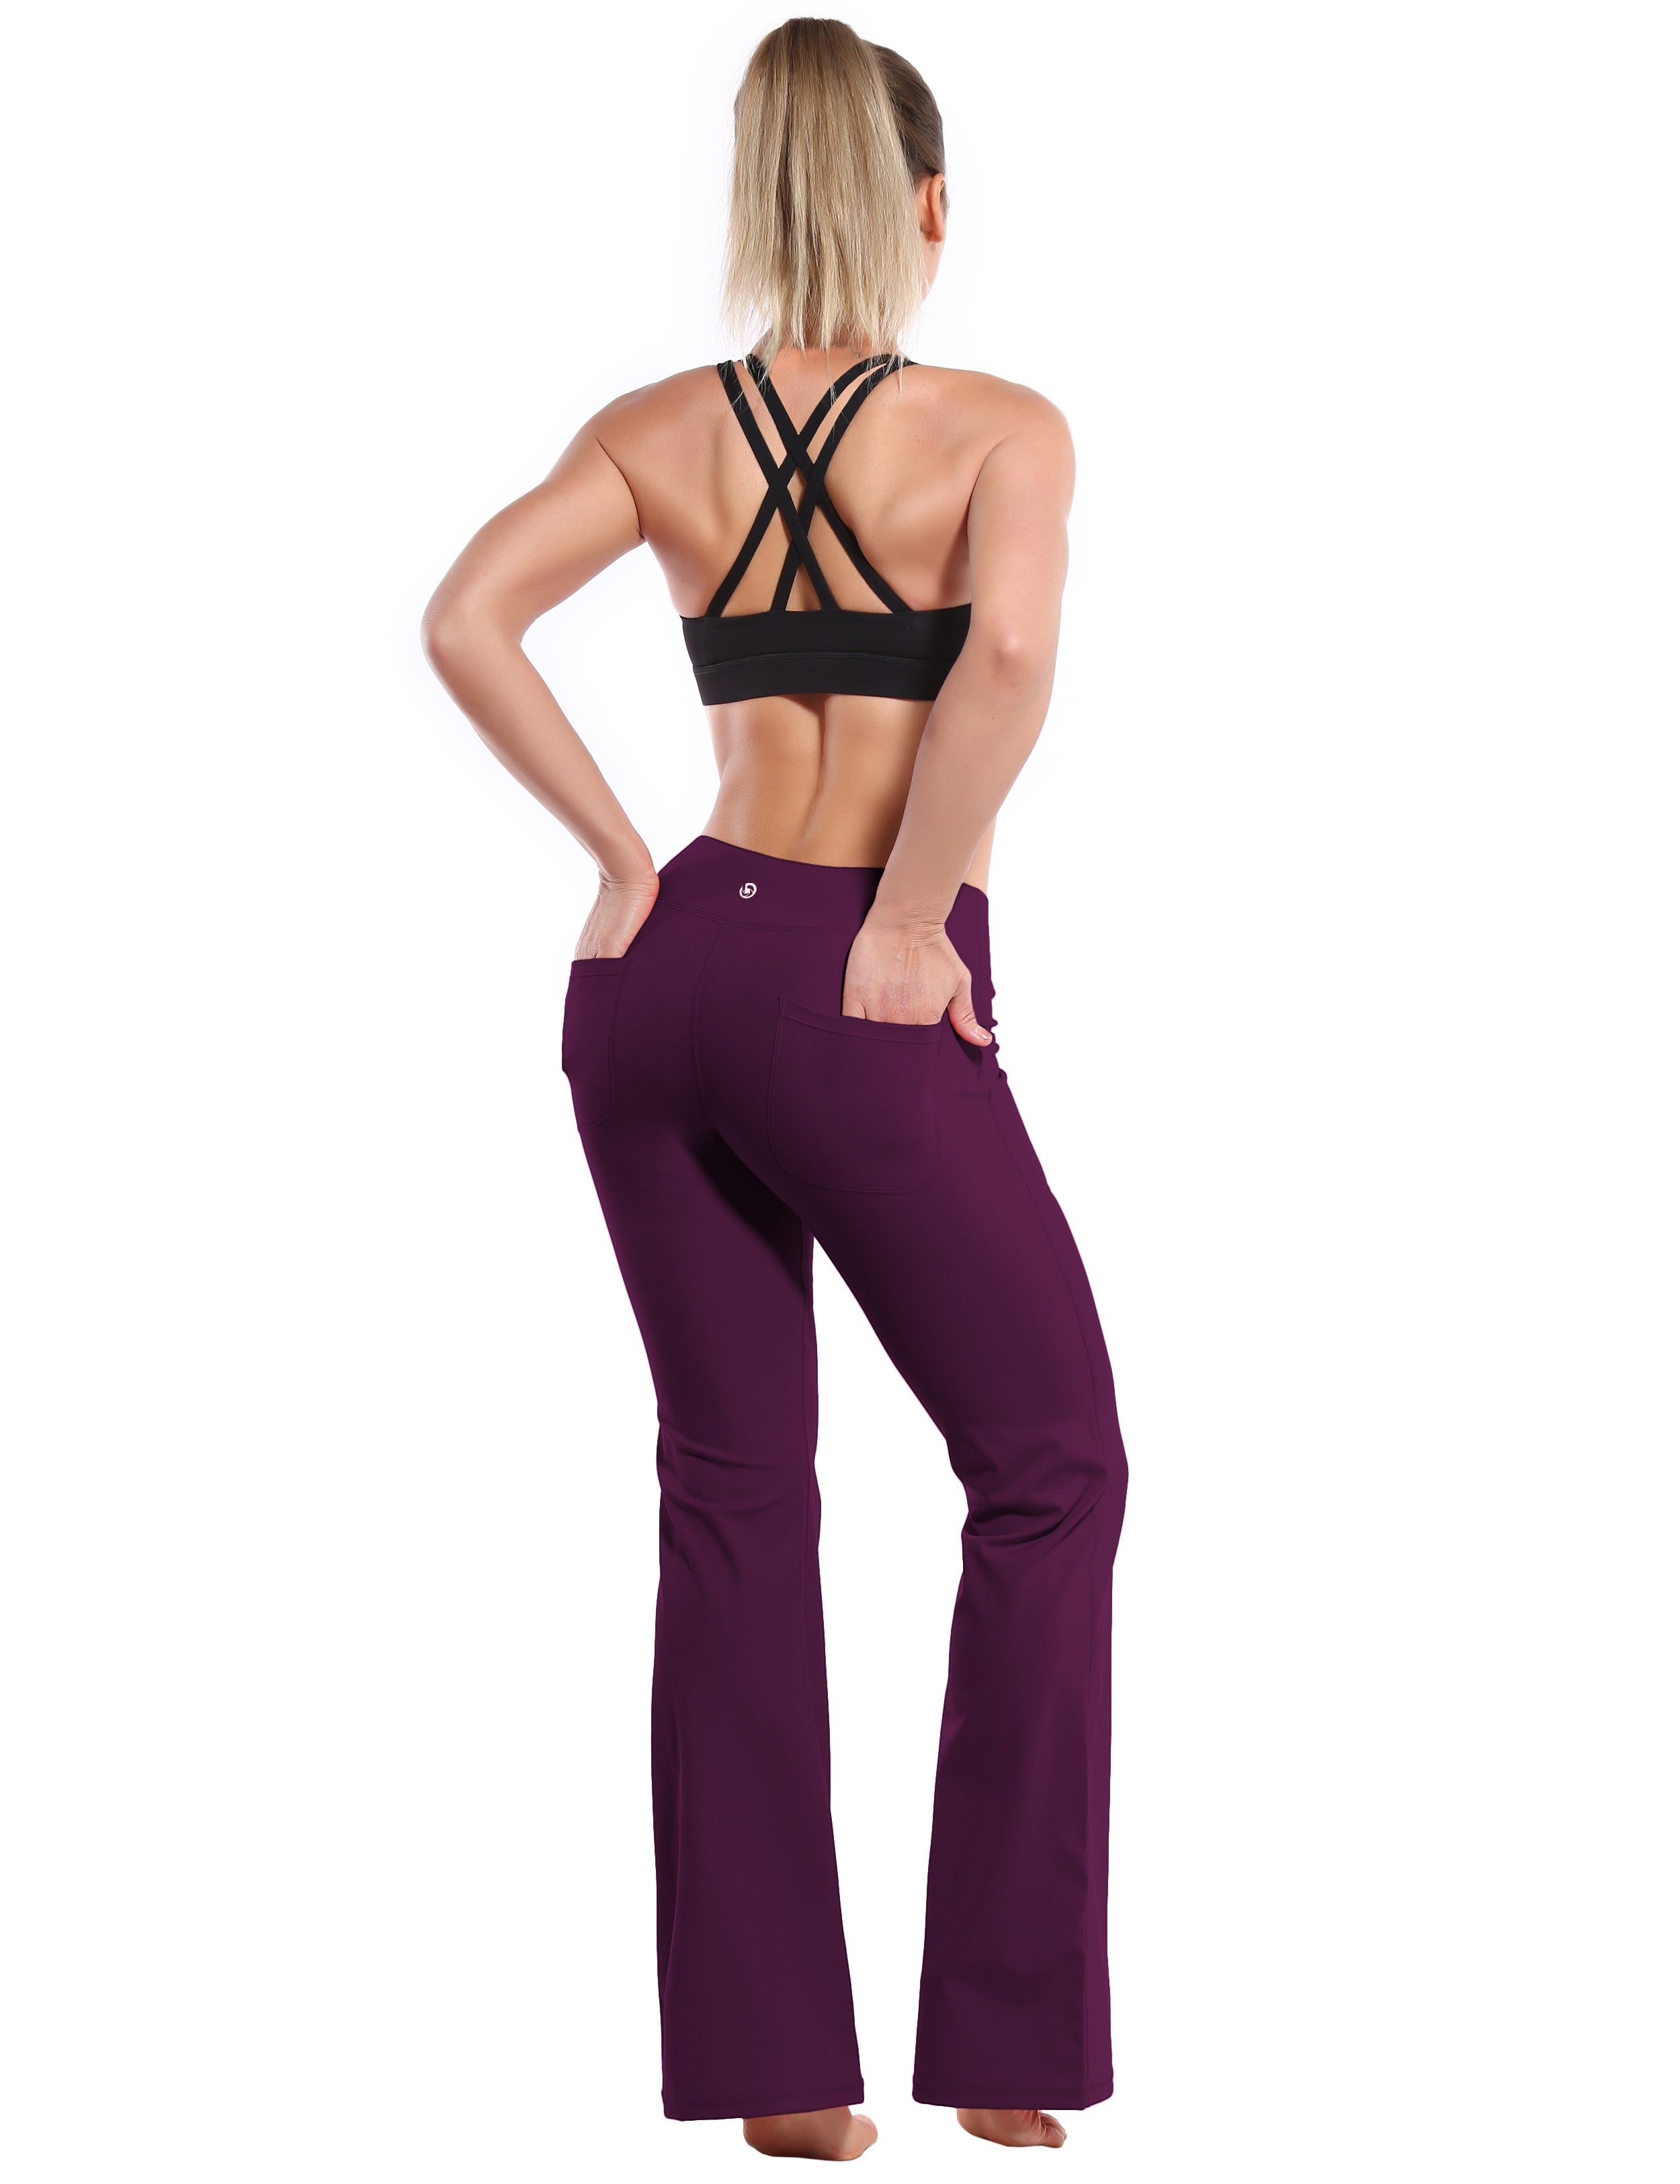 4 Pockets Bootcut Leggings grapevine 75%Nylon/25%Spandex Fabric doesn't attract lint easily 4-way stretch No see-through Moisture-wicking Inner pocket Four lengths